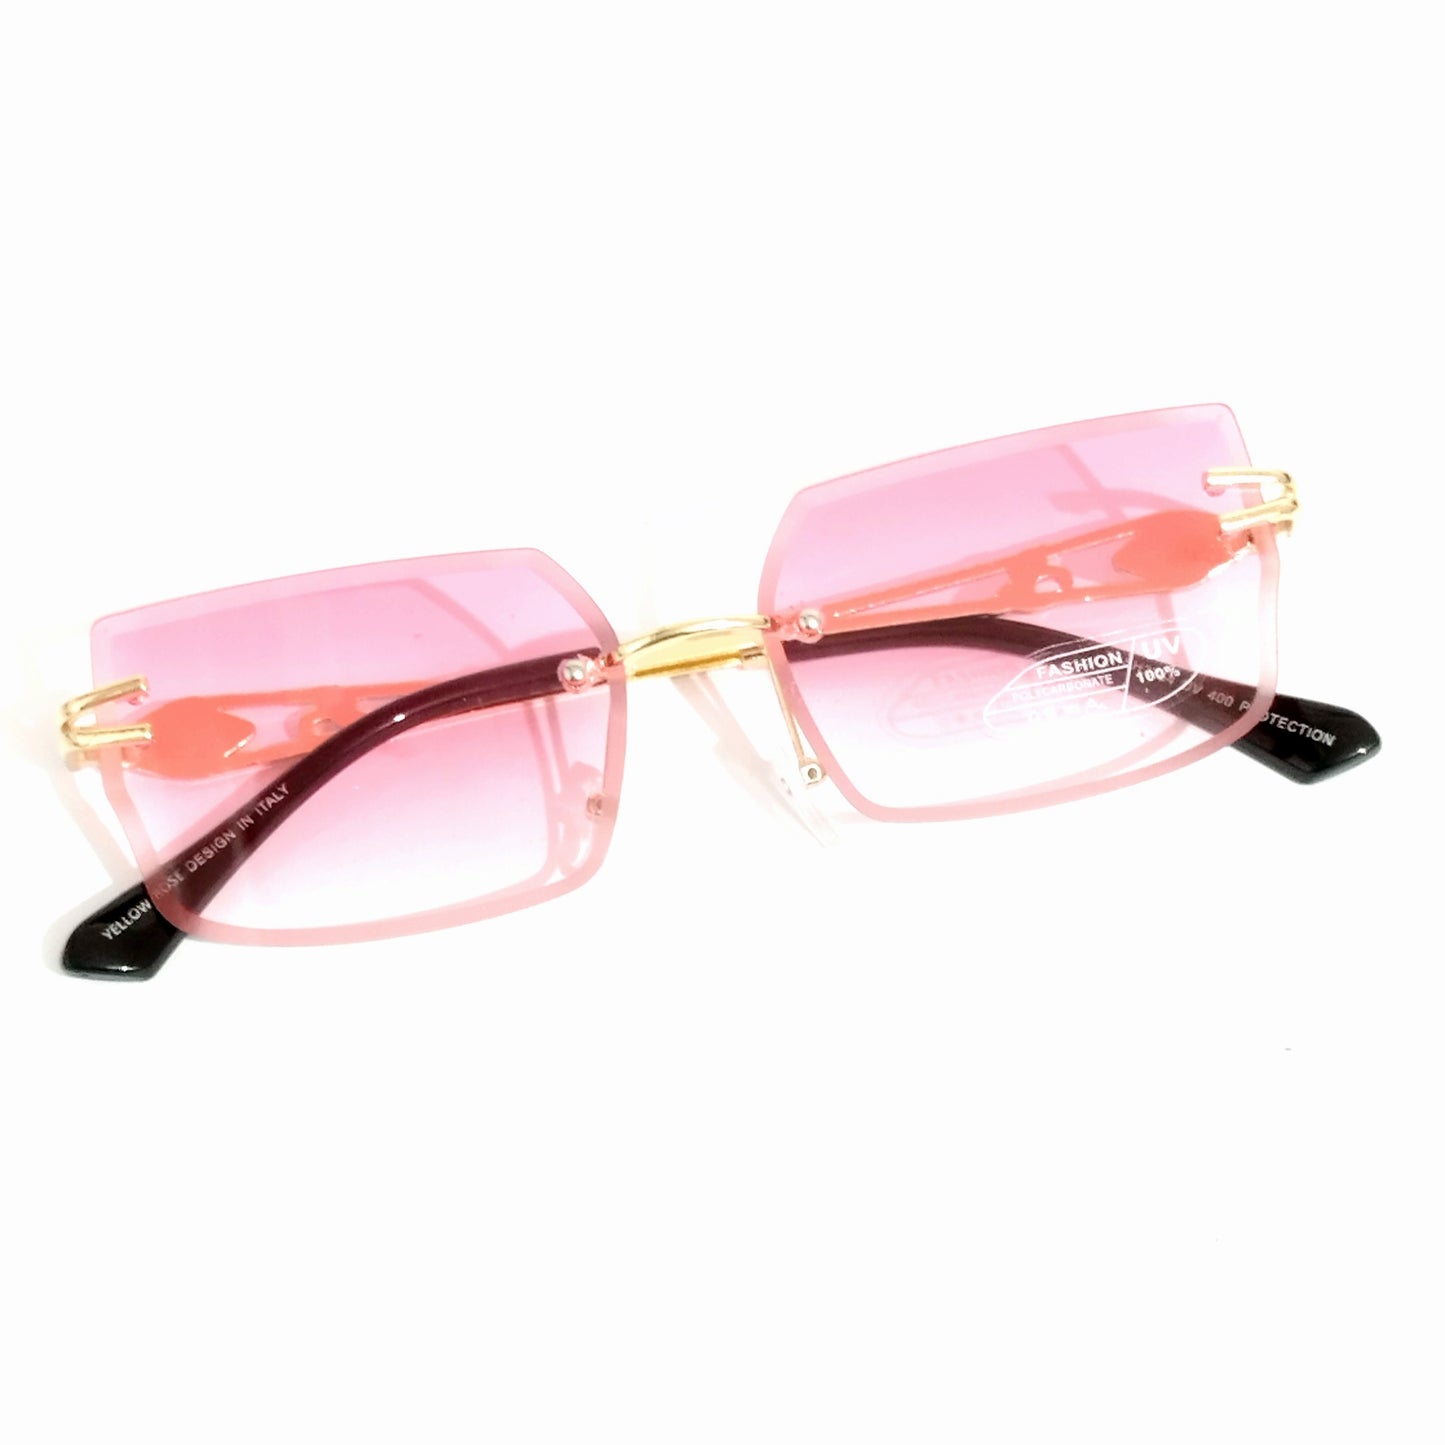 Enchant in Rose Gold Pink: Chic Rimless Sunglasses with a Modern Twist